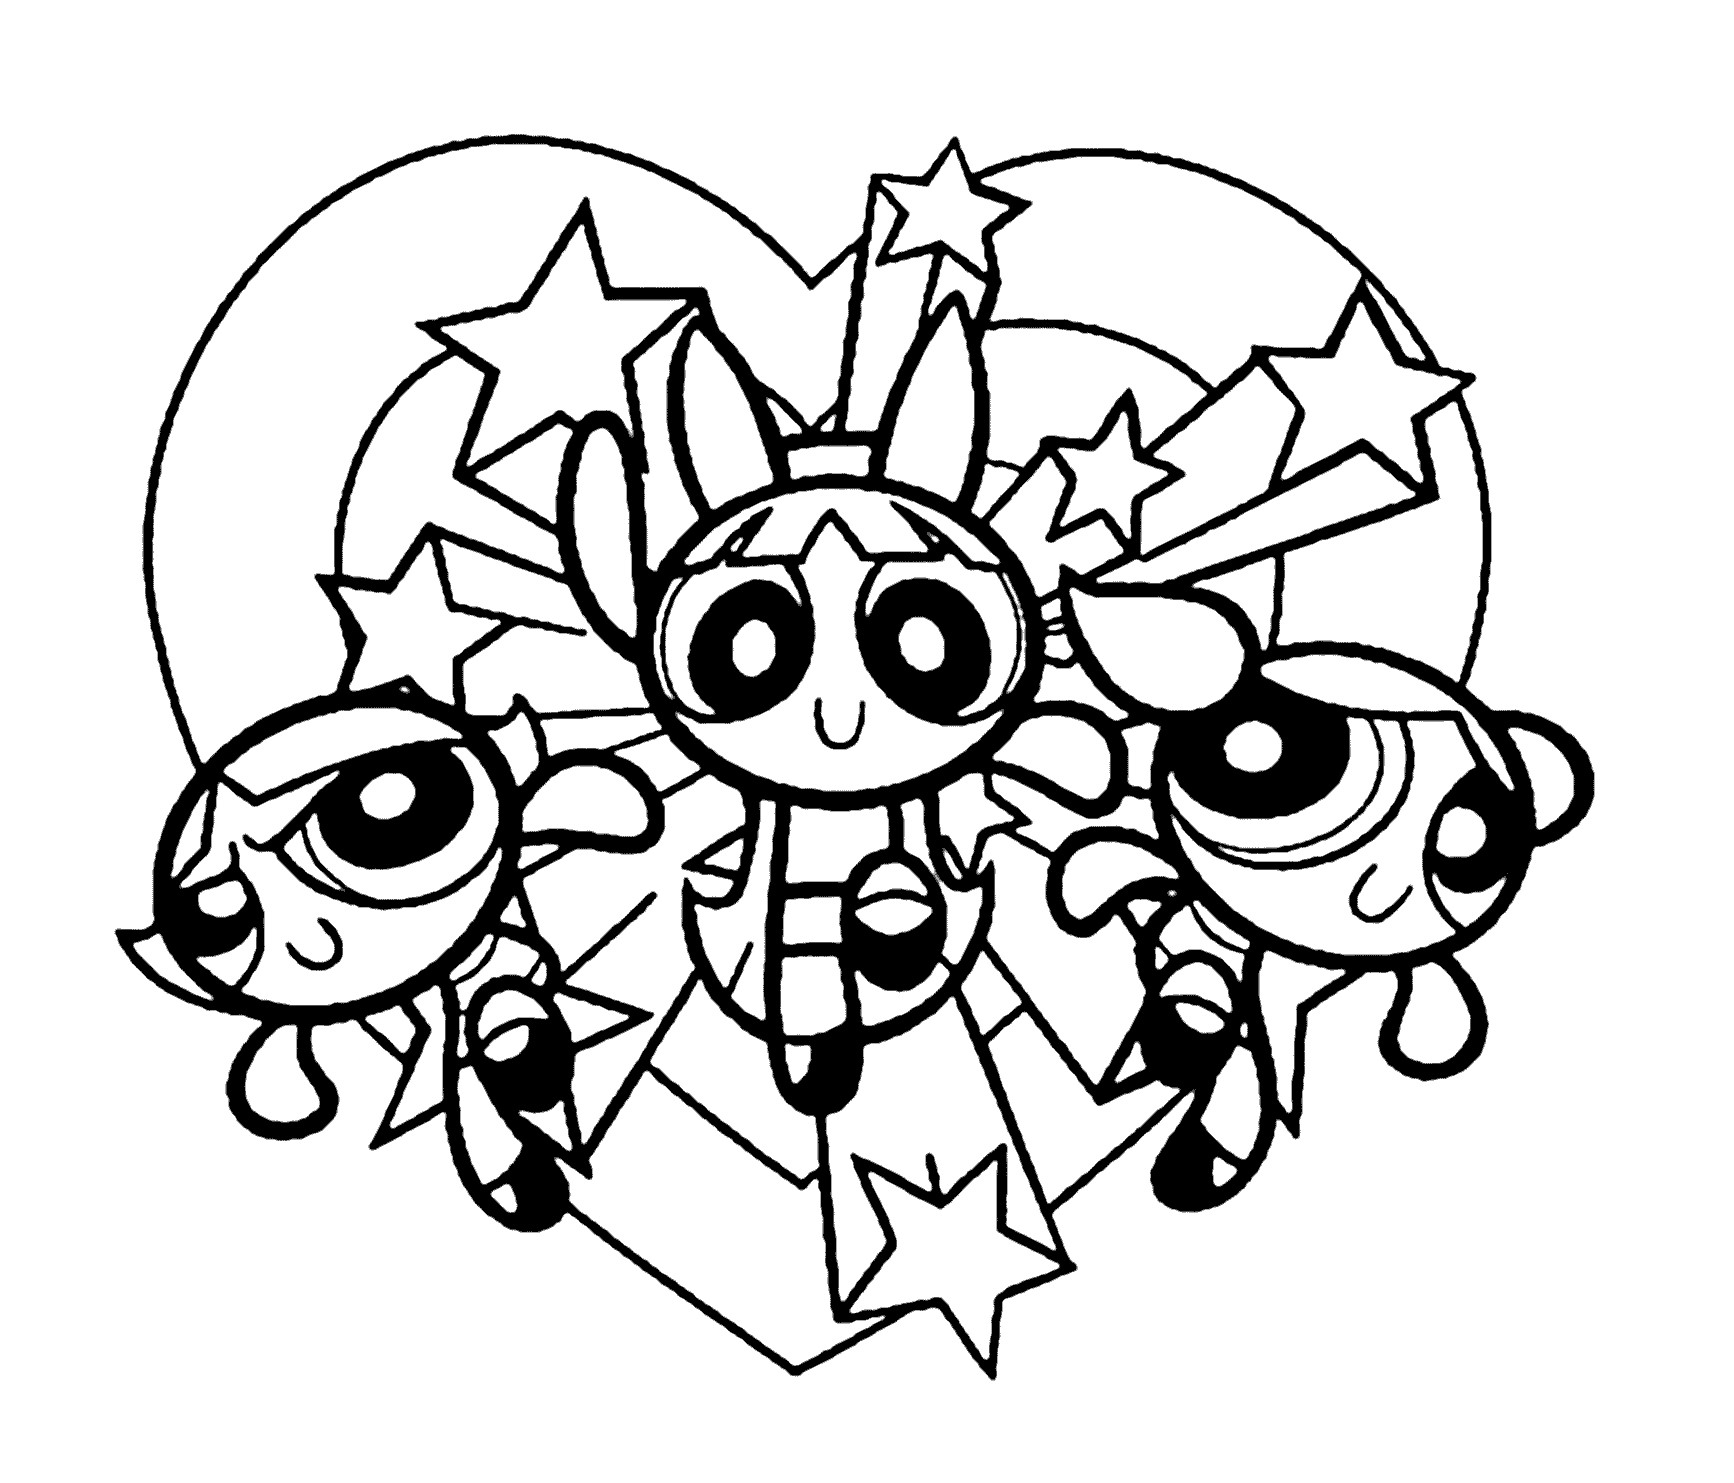 Coloring Pages Powerpuff Girls
 12 printable pictures of powerpuff girls page Print